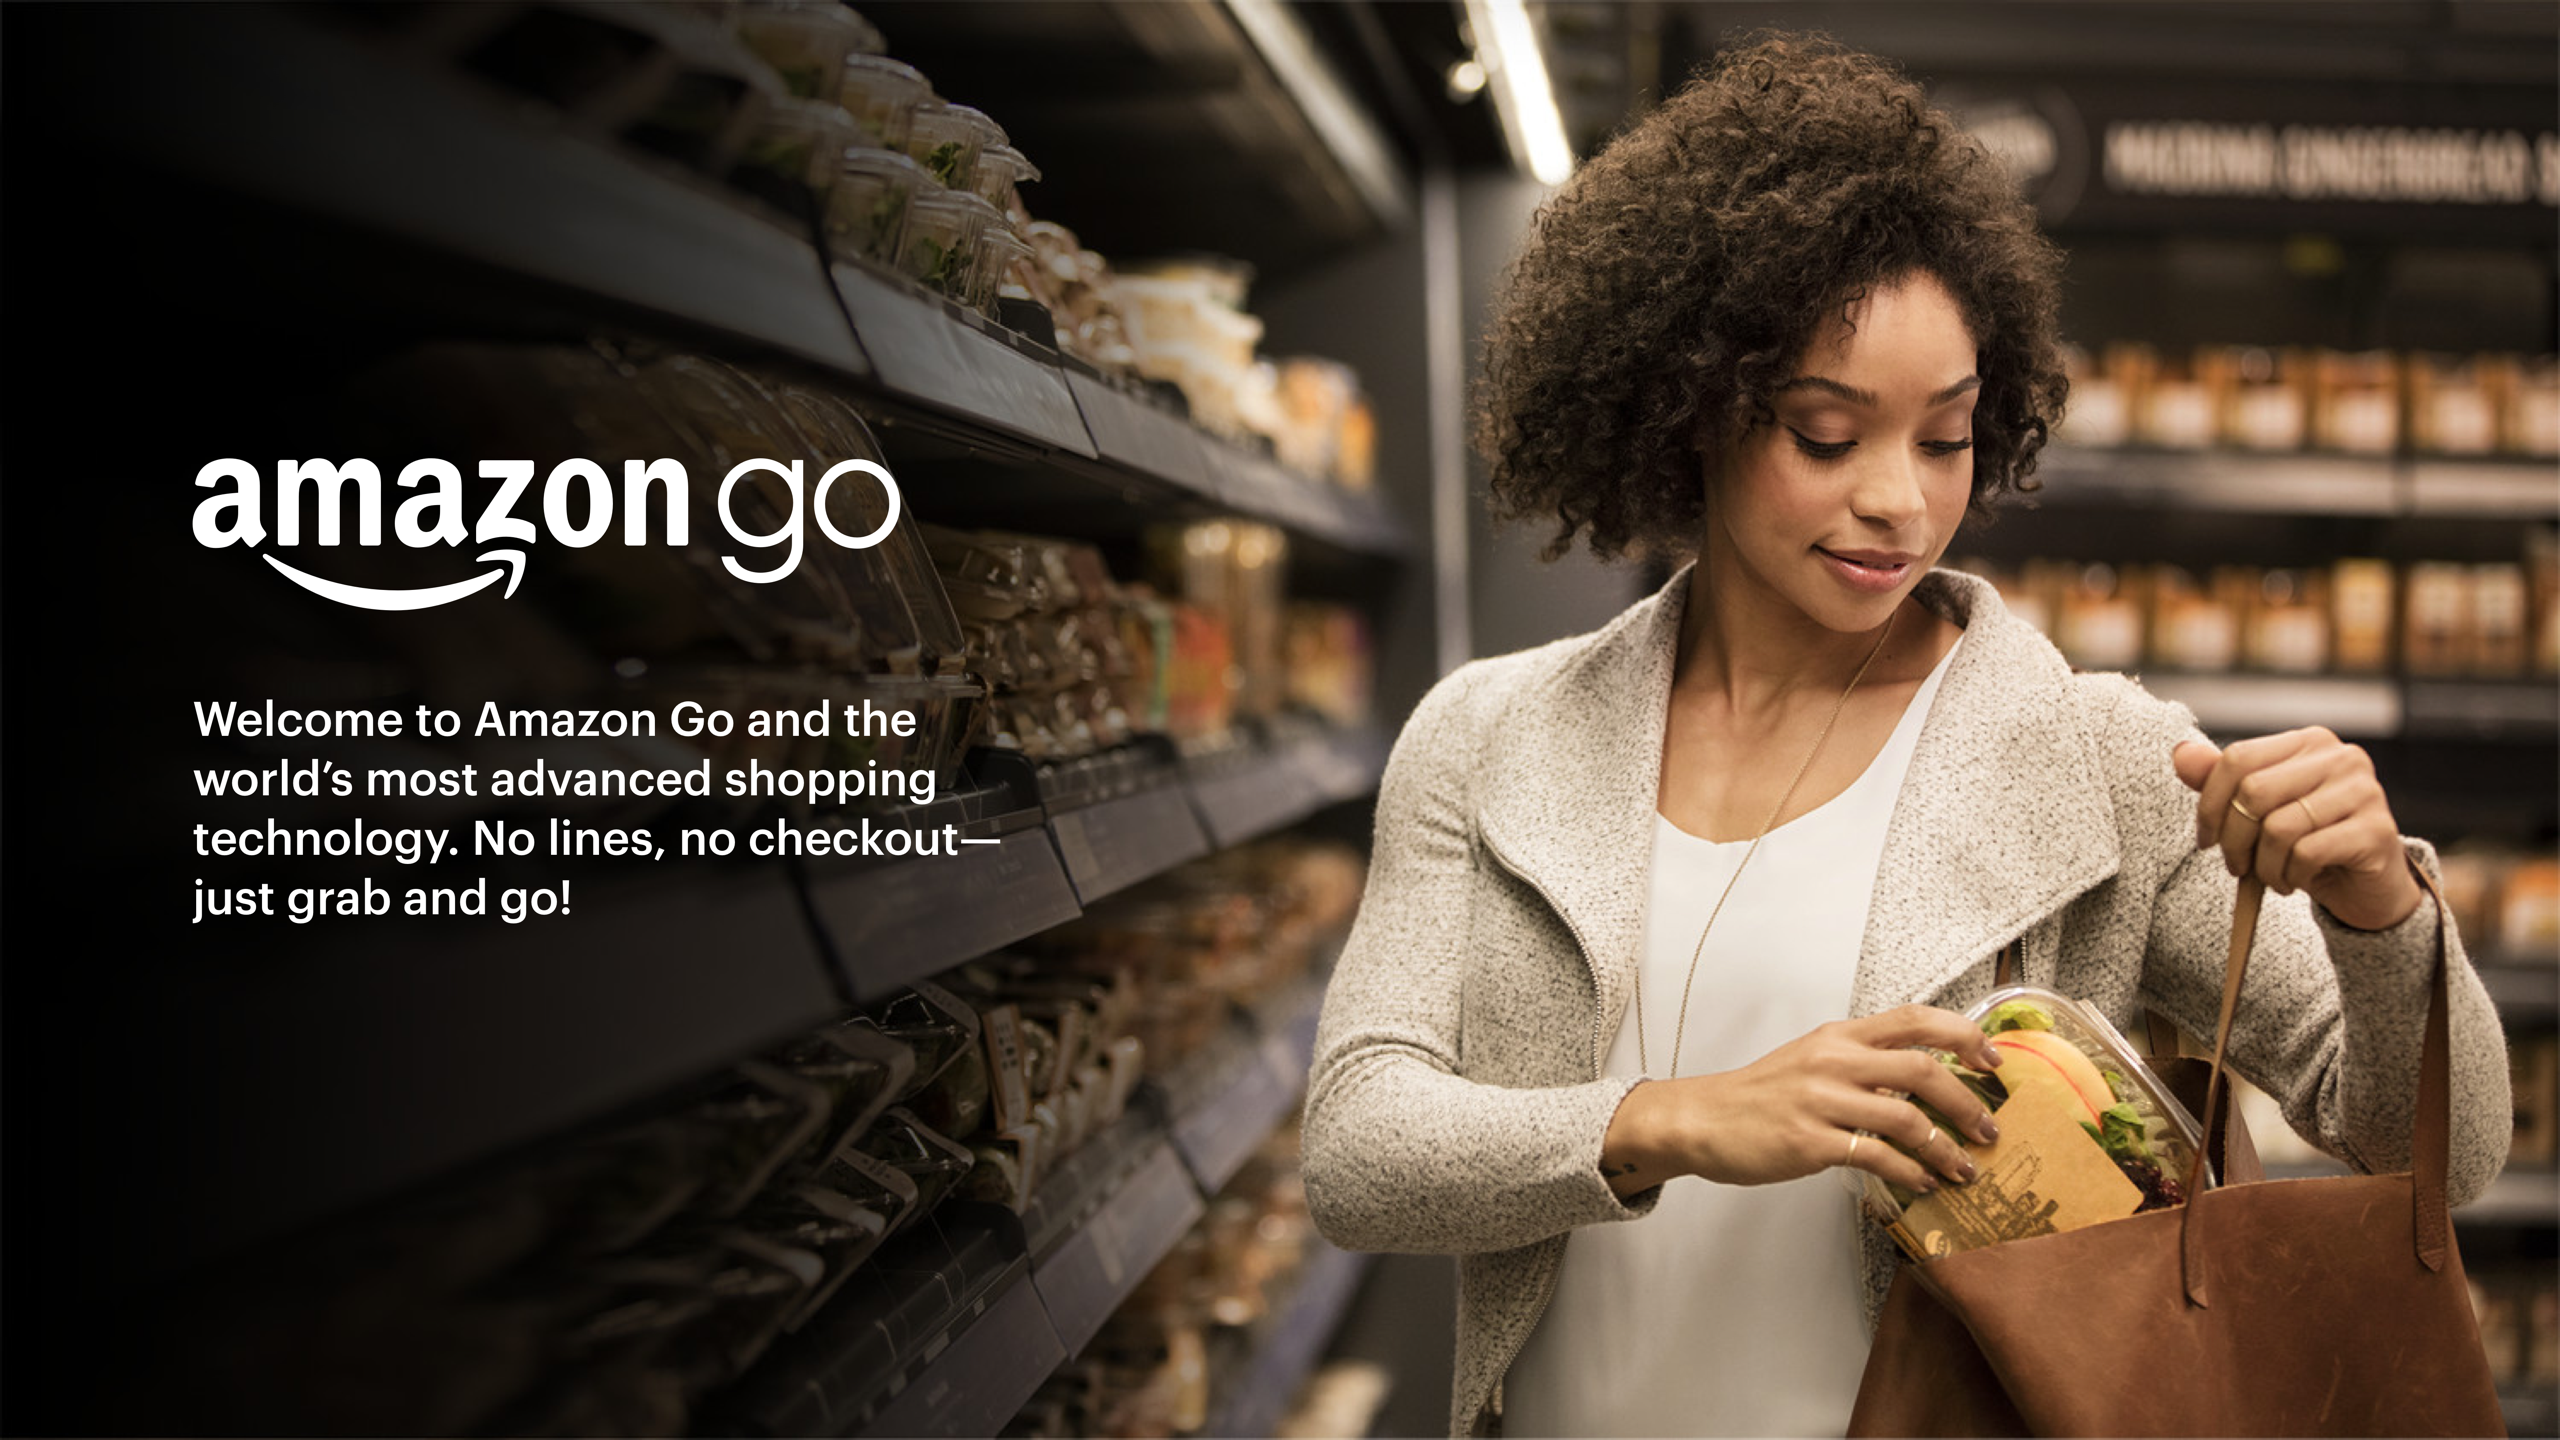 amazon-to-open-3-000-amazon-go-stores-by-2021-the-indian-wire